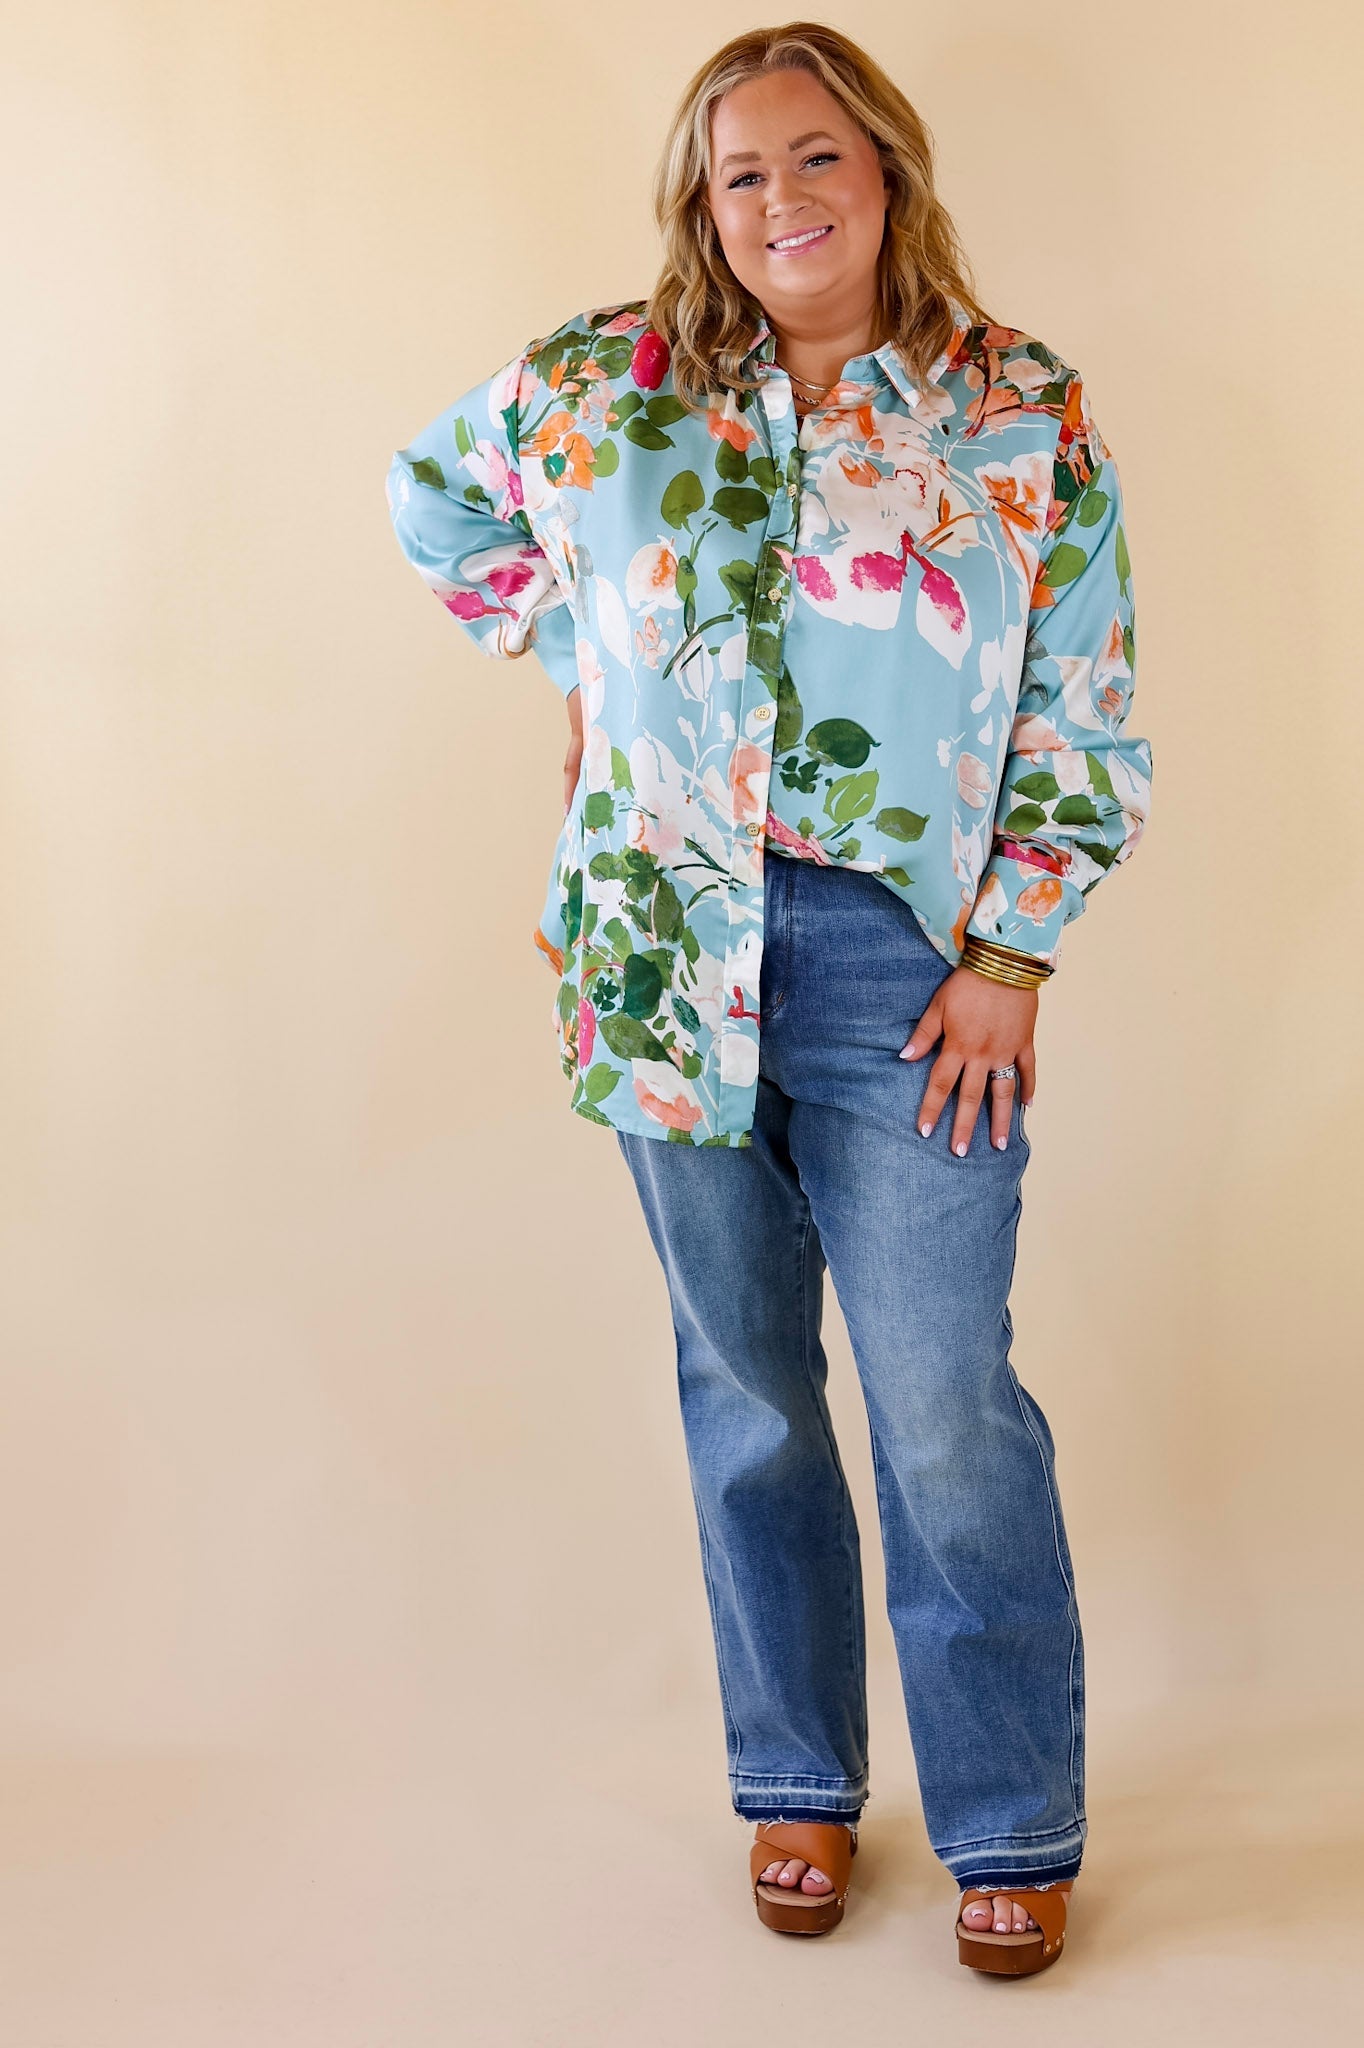 Tell Me Something Good Floral Long Sleeve Button Up Top in Light Blue - Giddy Up Glamour Boutique